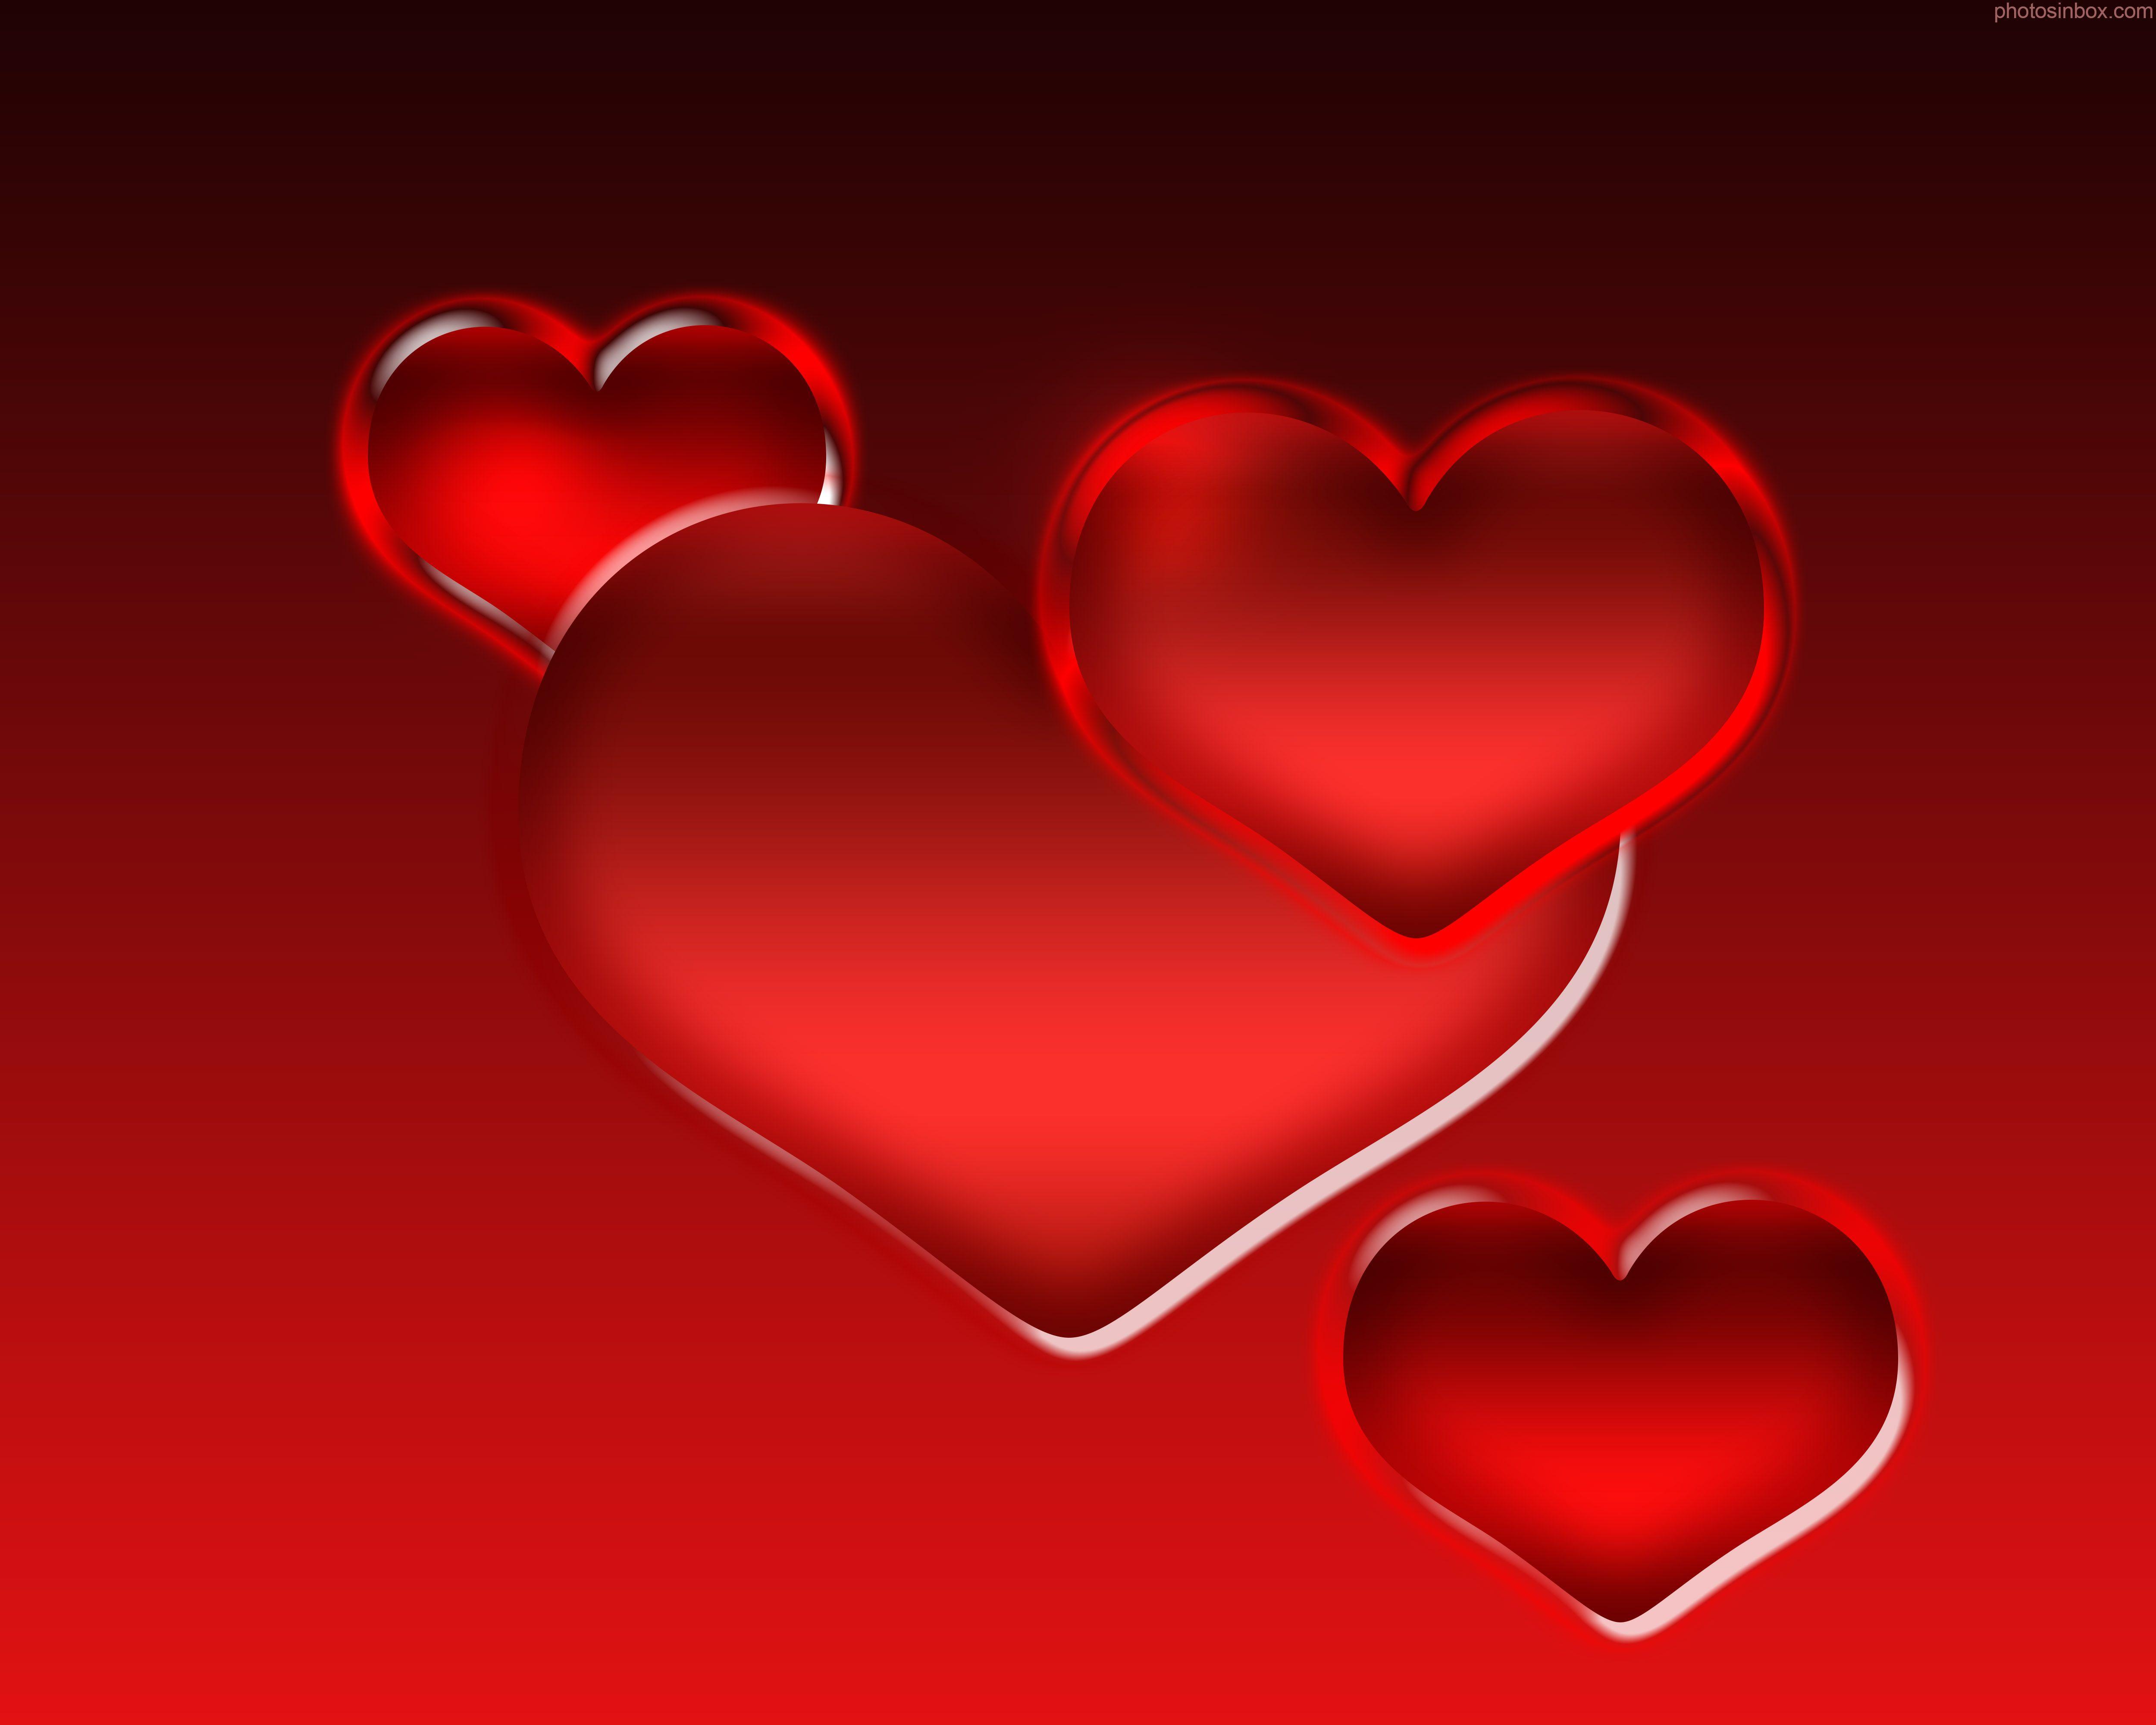 16 Stunning Red Heart With Black Background Wallpaper Box